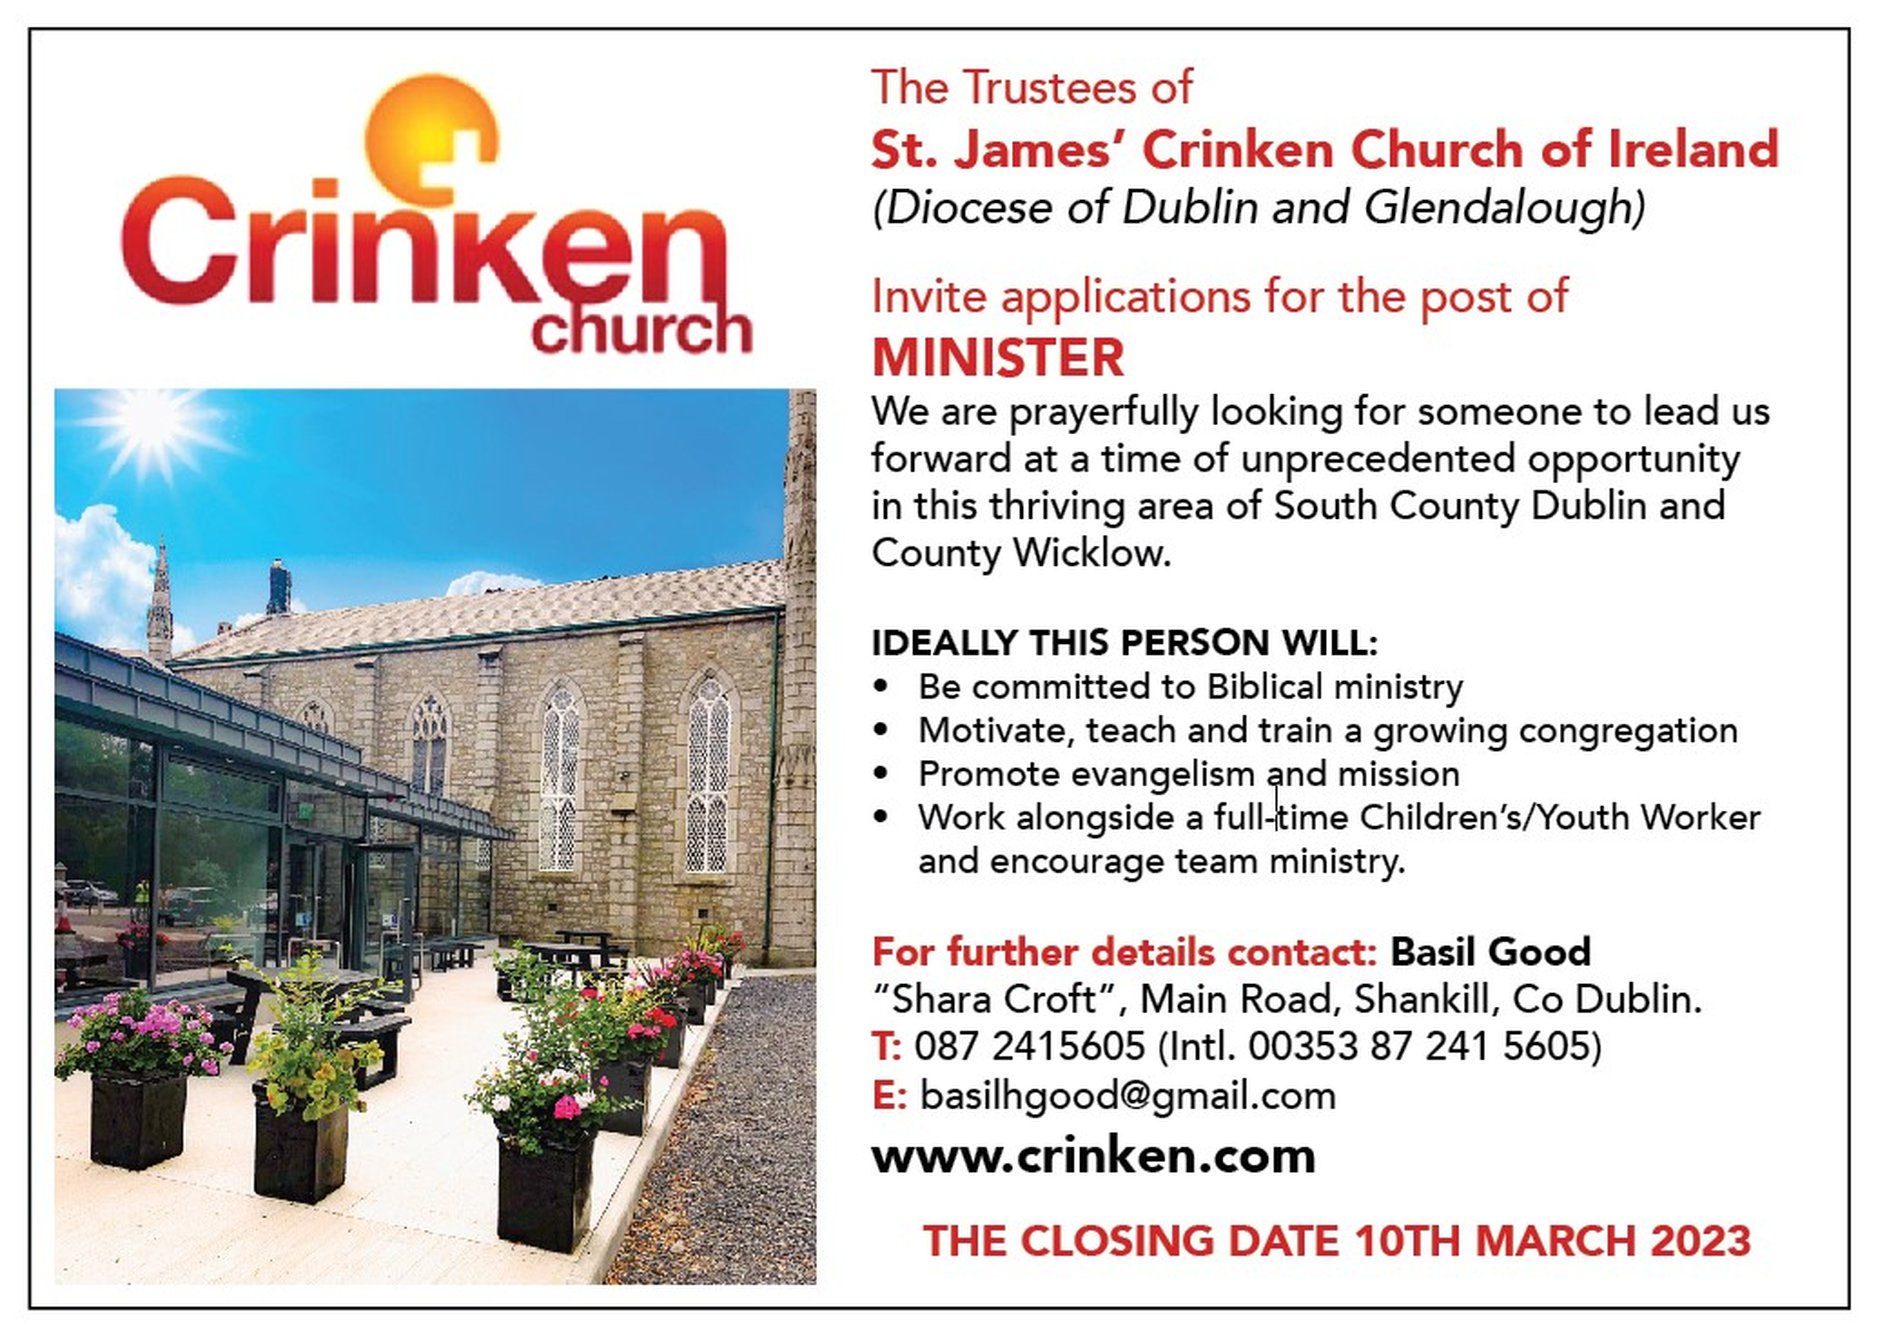 Vacancy – Minister – St James’s Church, Crinken, Dublin and Glendalough - St James’s Church, Crinken, are seeking to appoint a Minister.